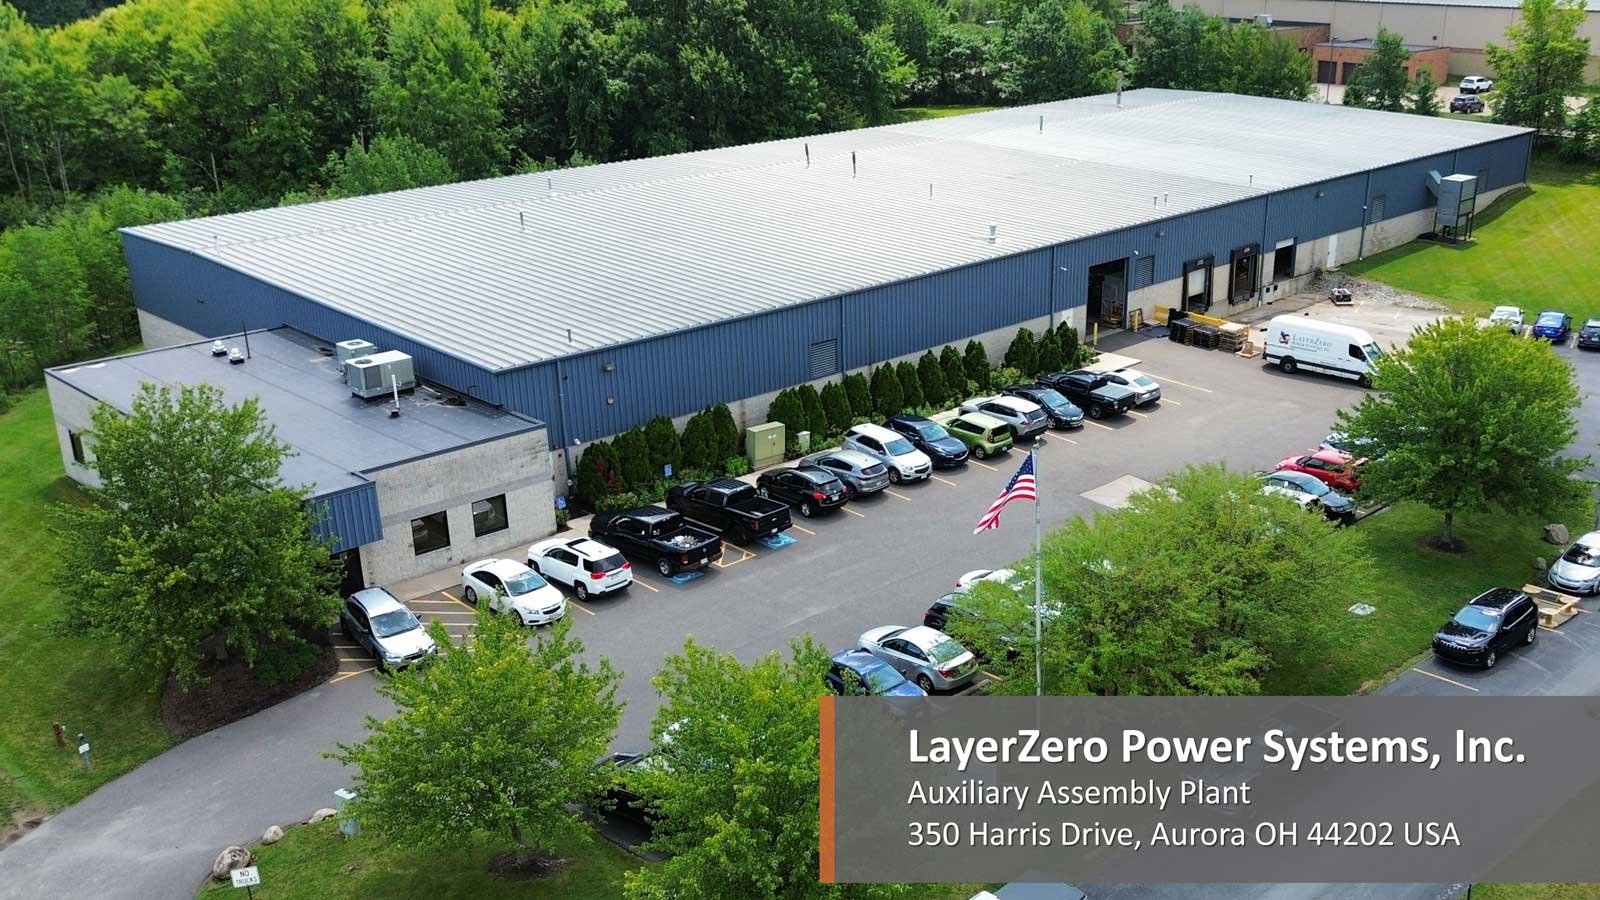 The Assembly Plant for LayerZero Power Systems